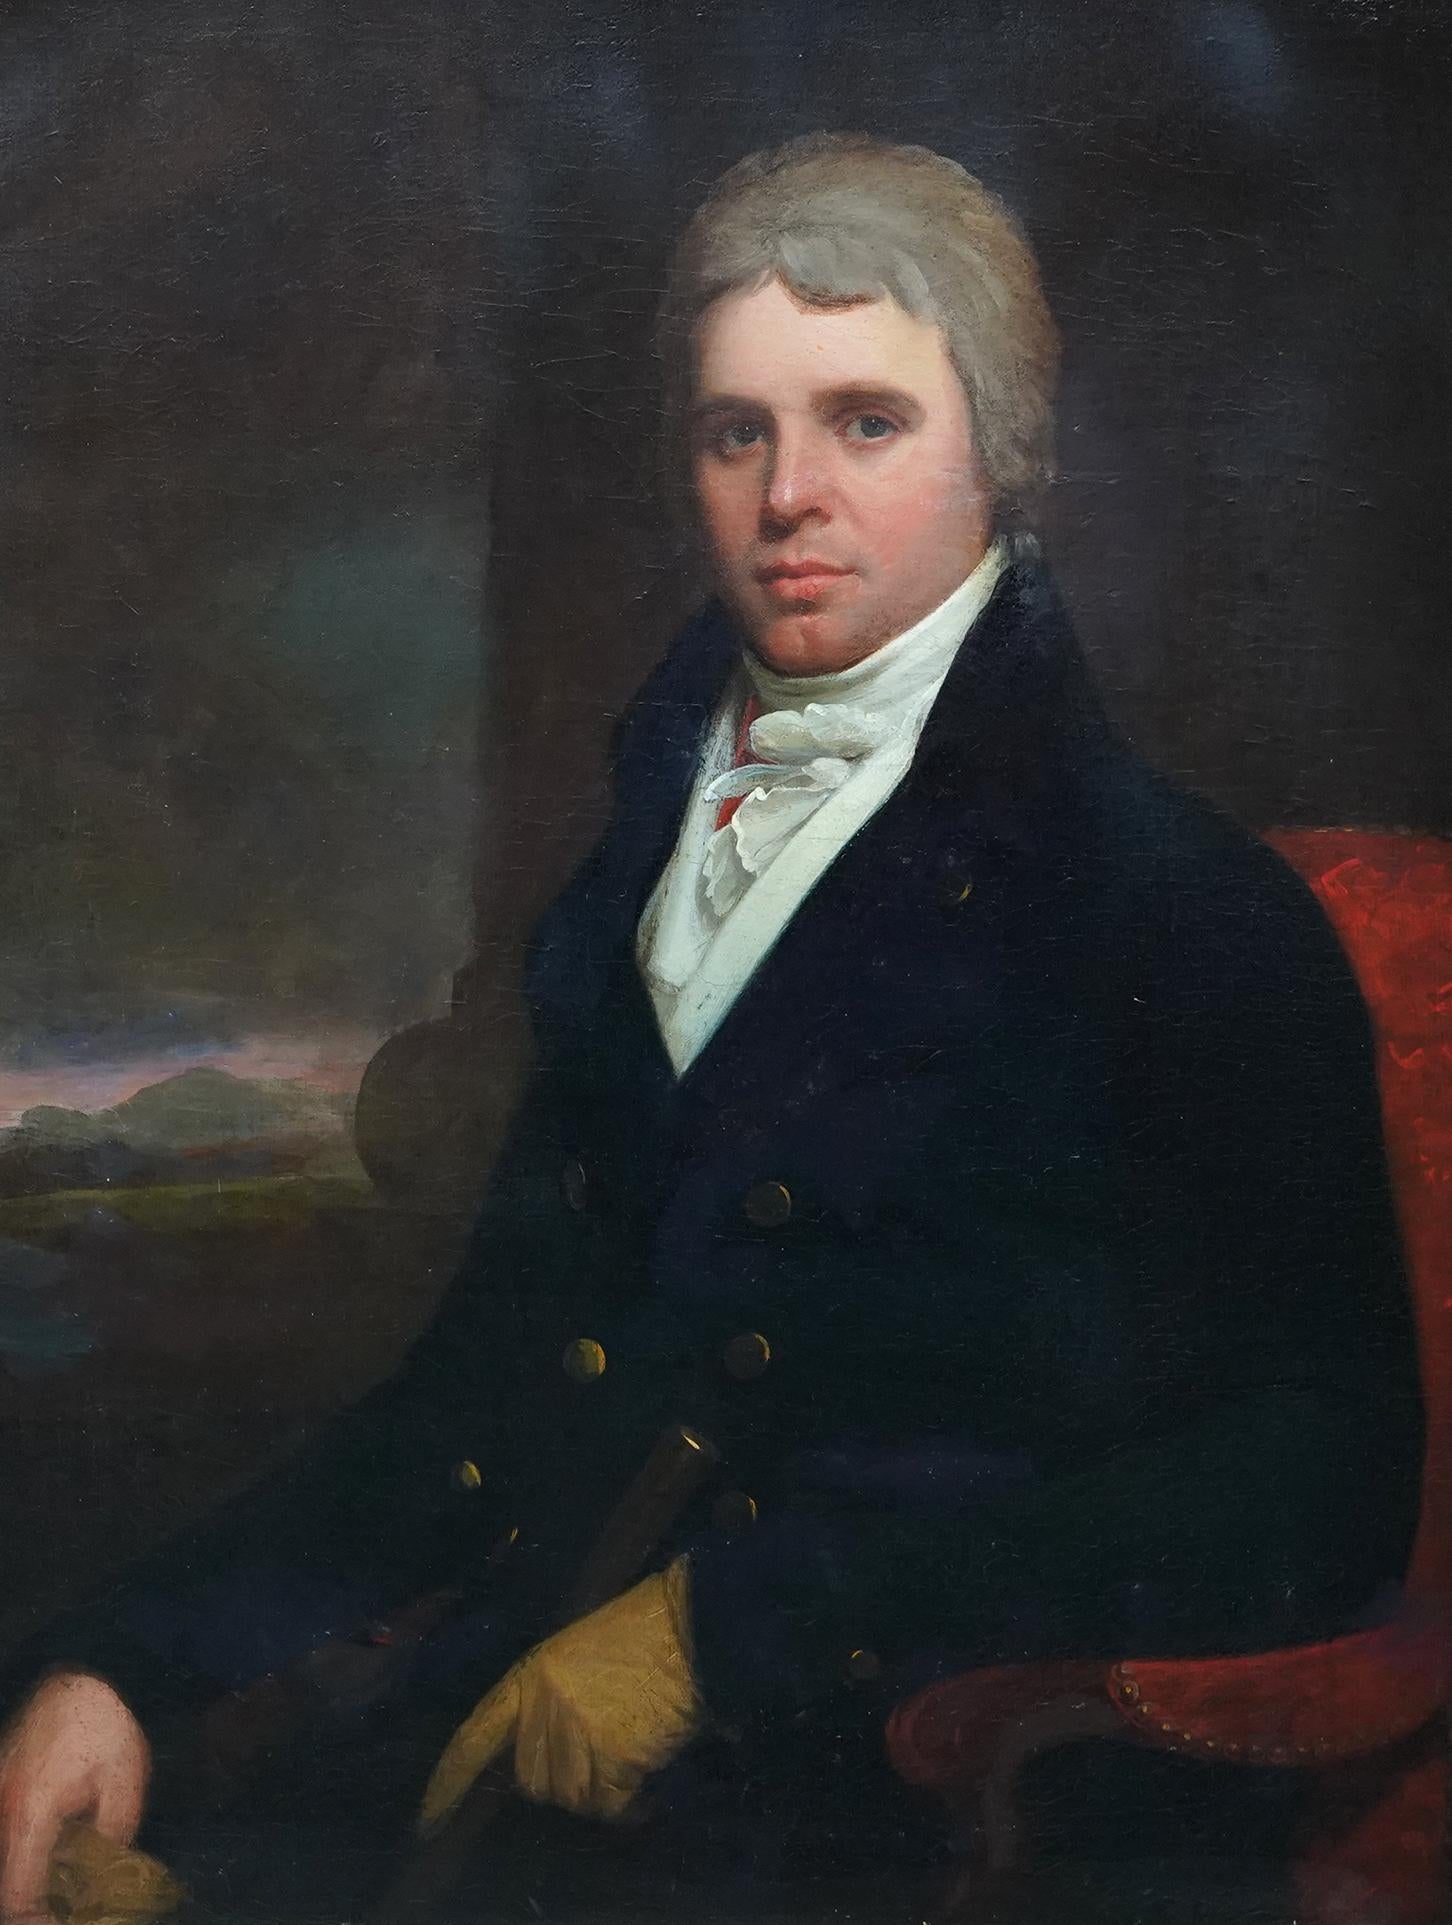 Portrait of Charles Stewart Parker - British 18thC art Old Master oil painting - Painting by Attributed to Henry Raeburn 